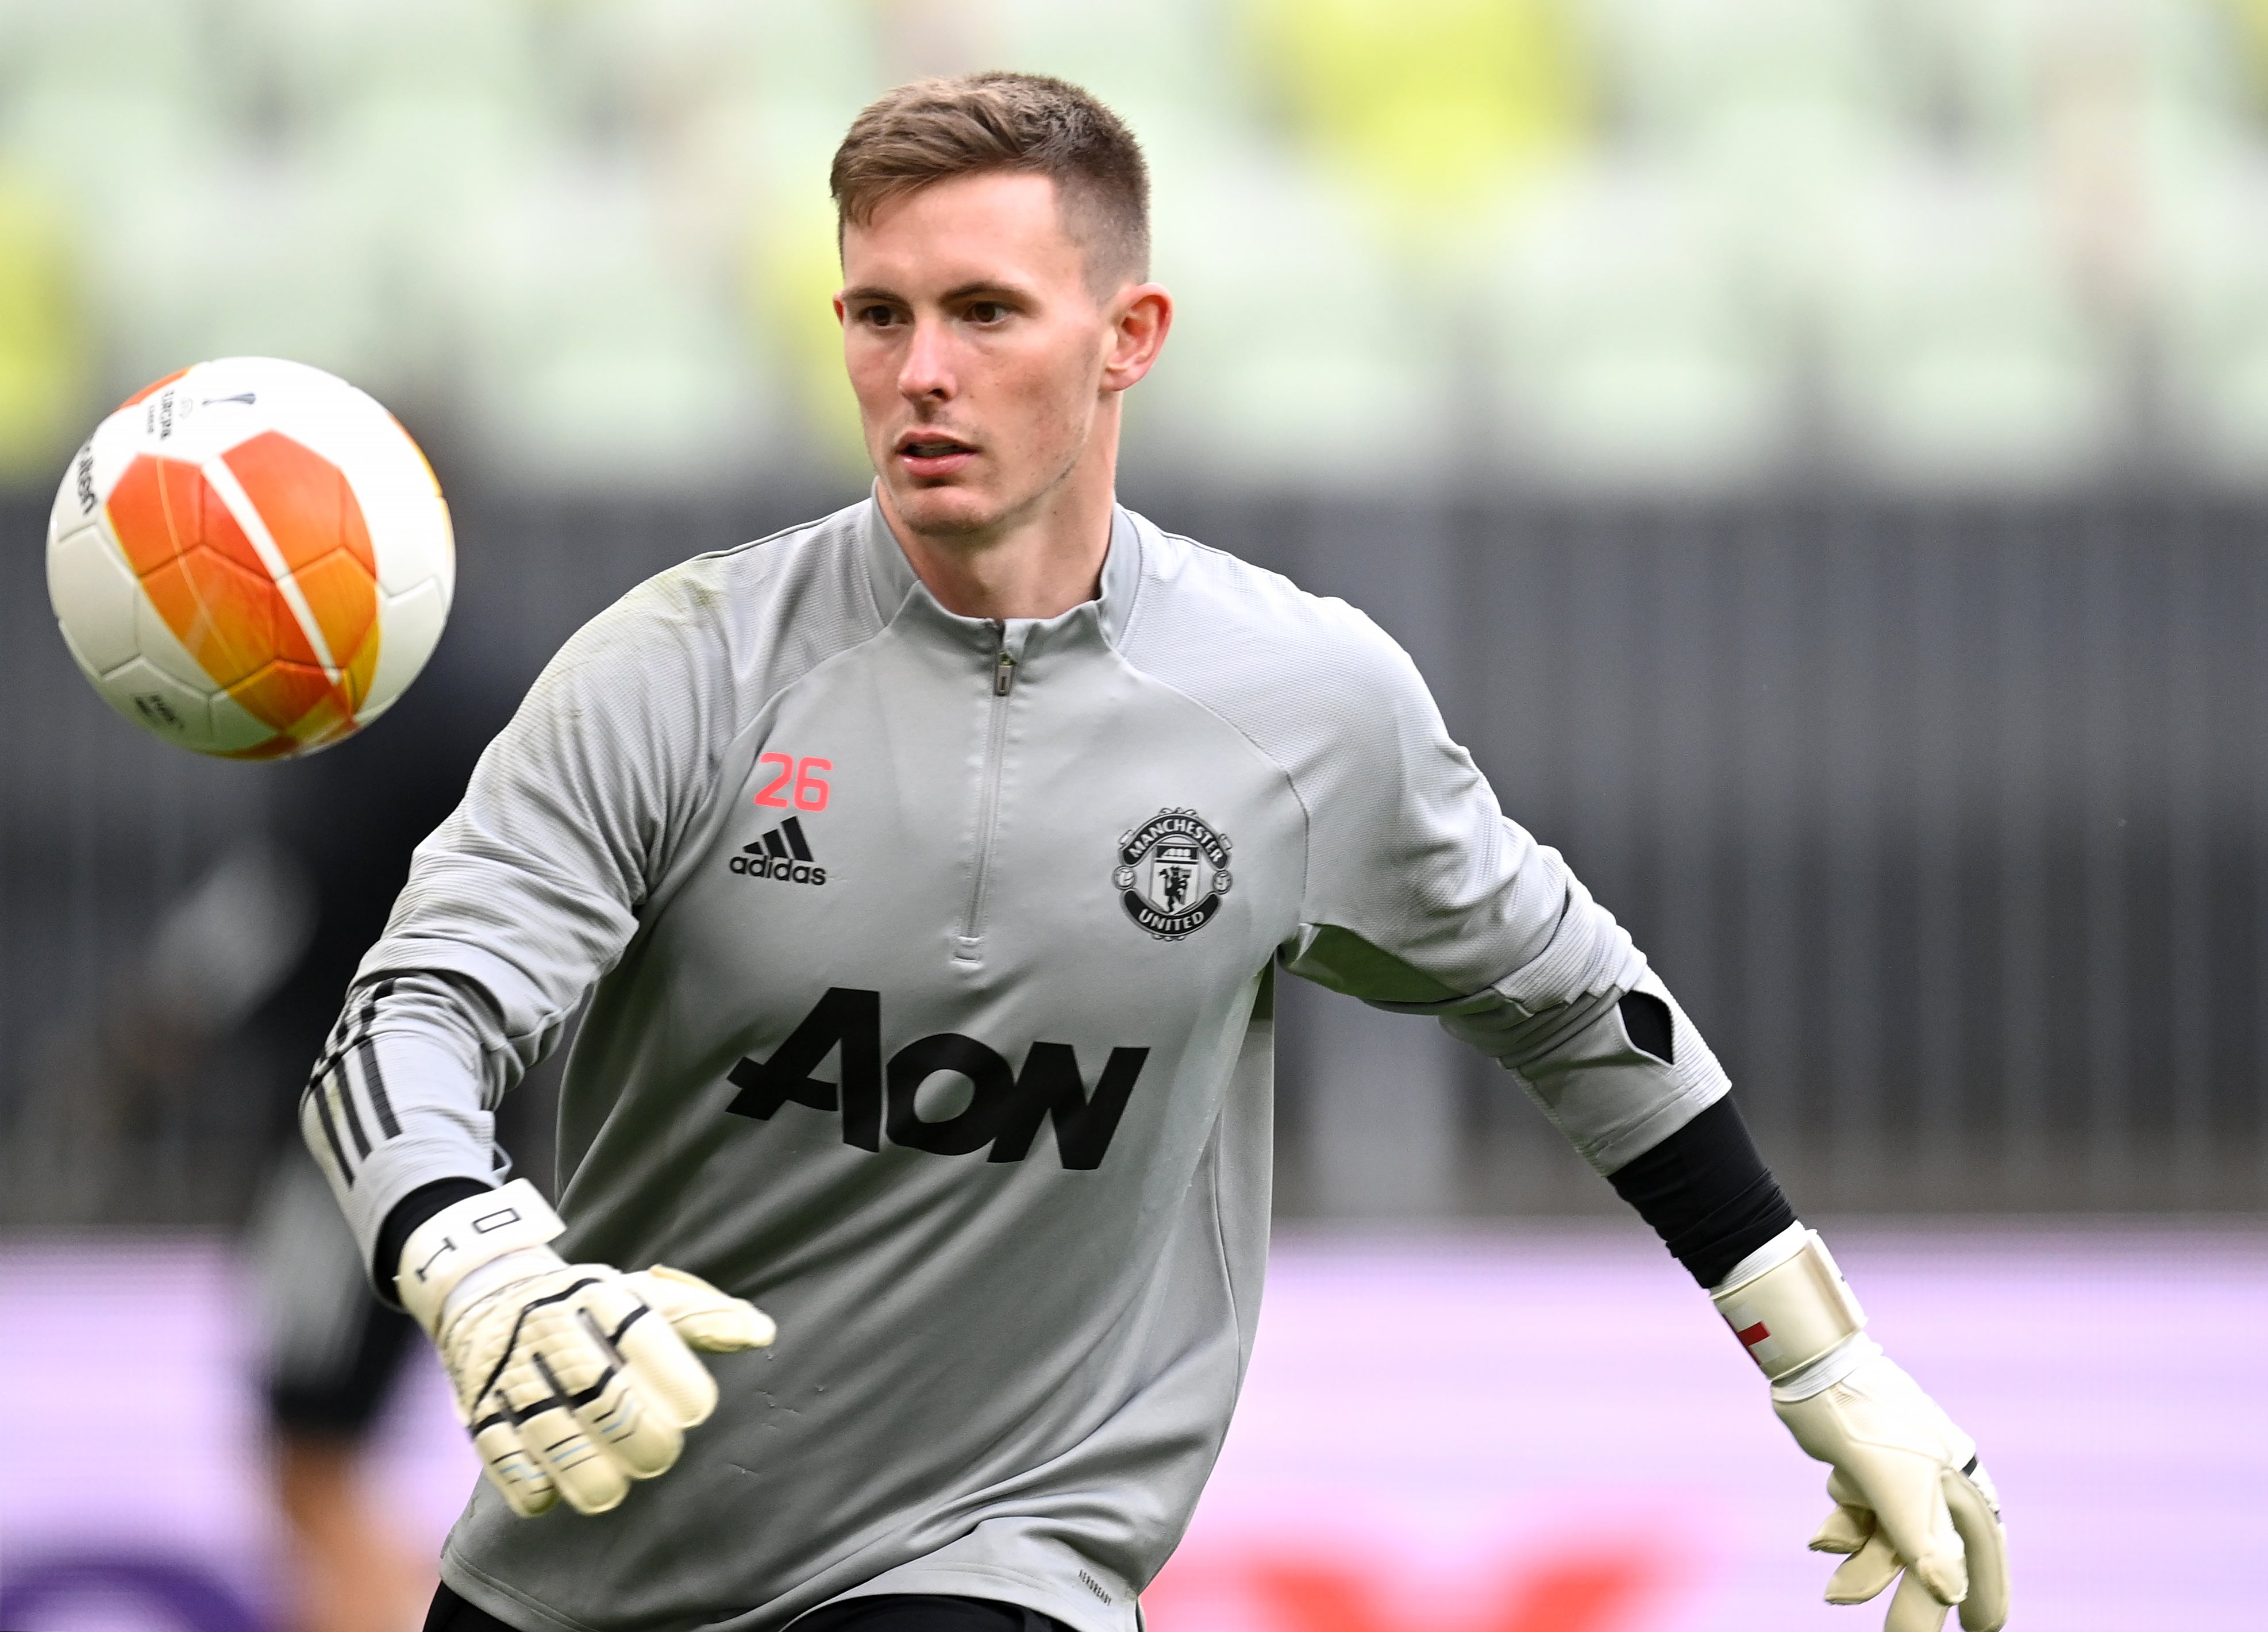 Nottingham Forest have completed the loan signing of Dean Henderson